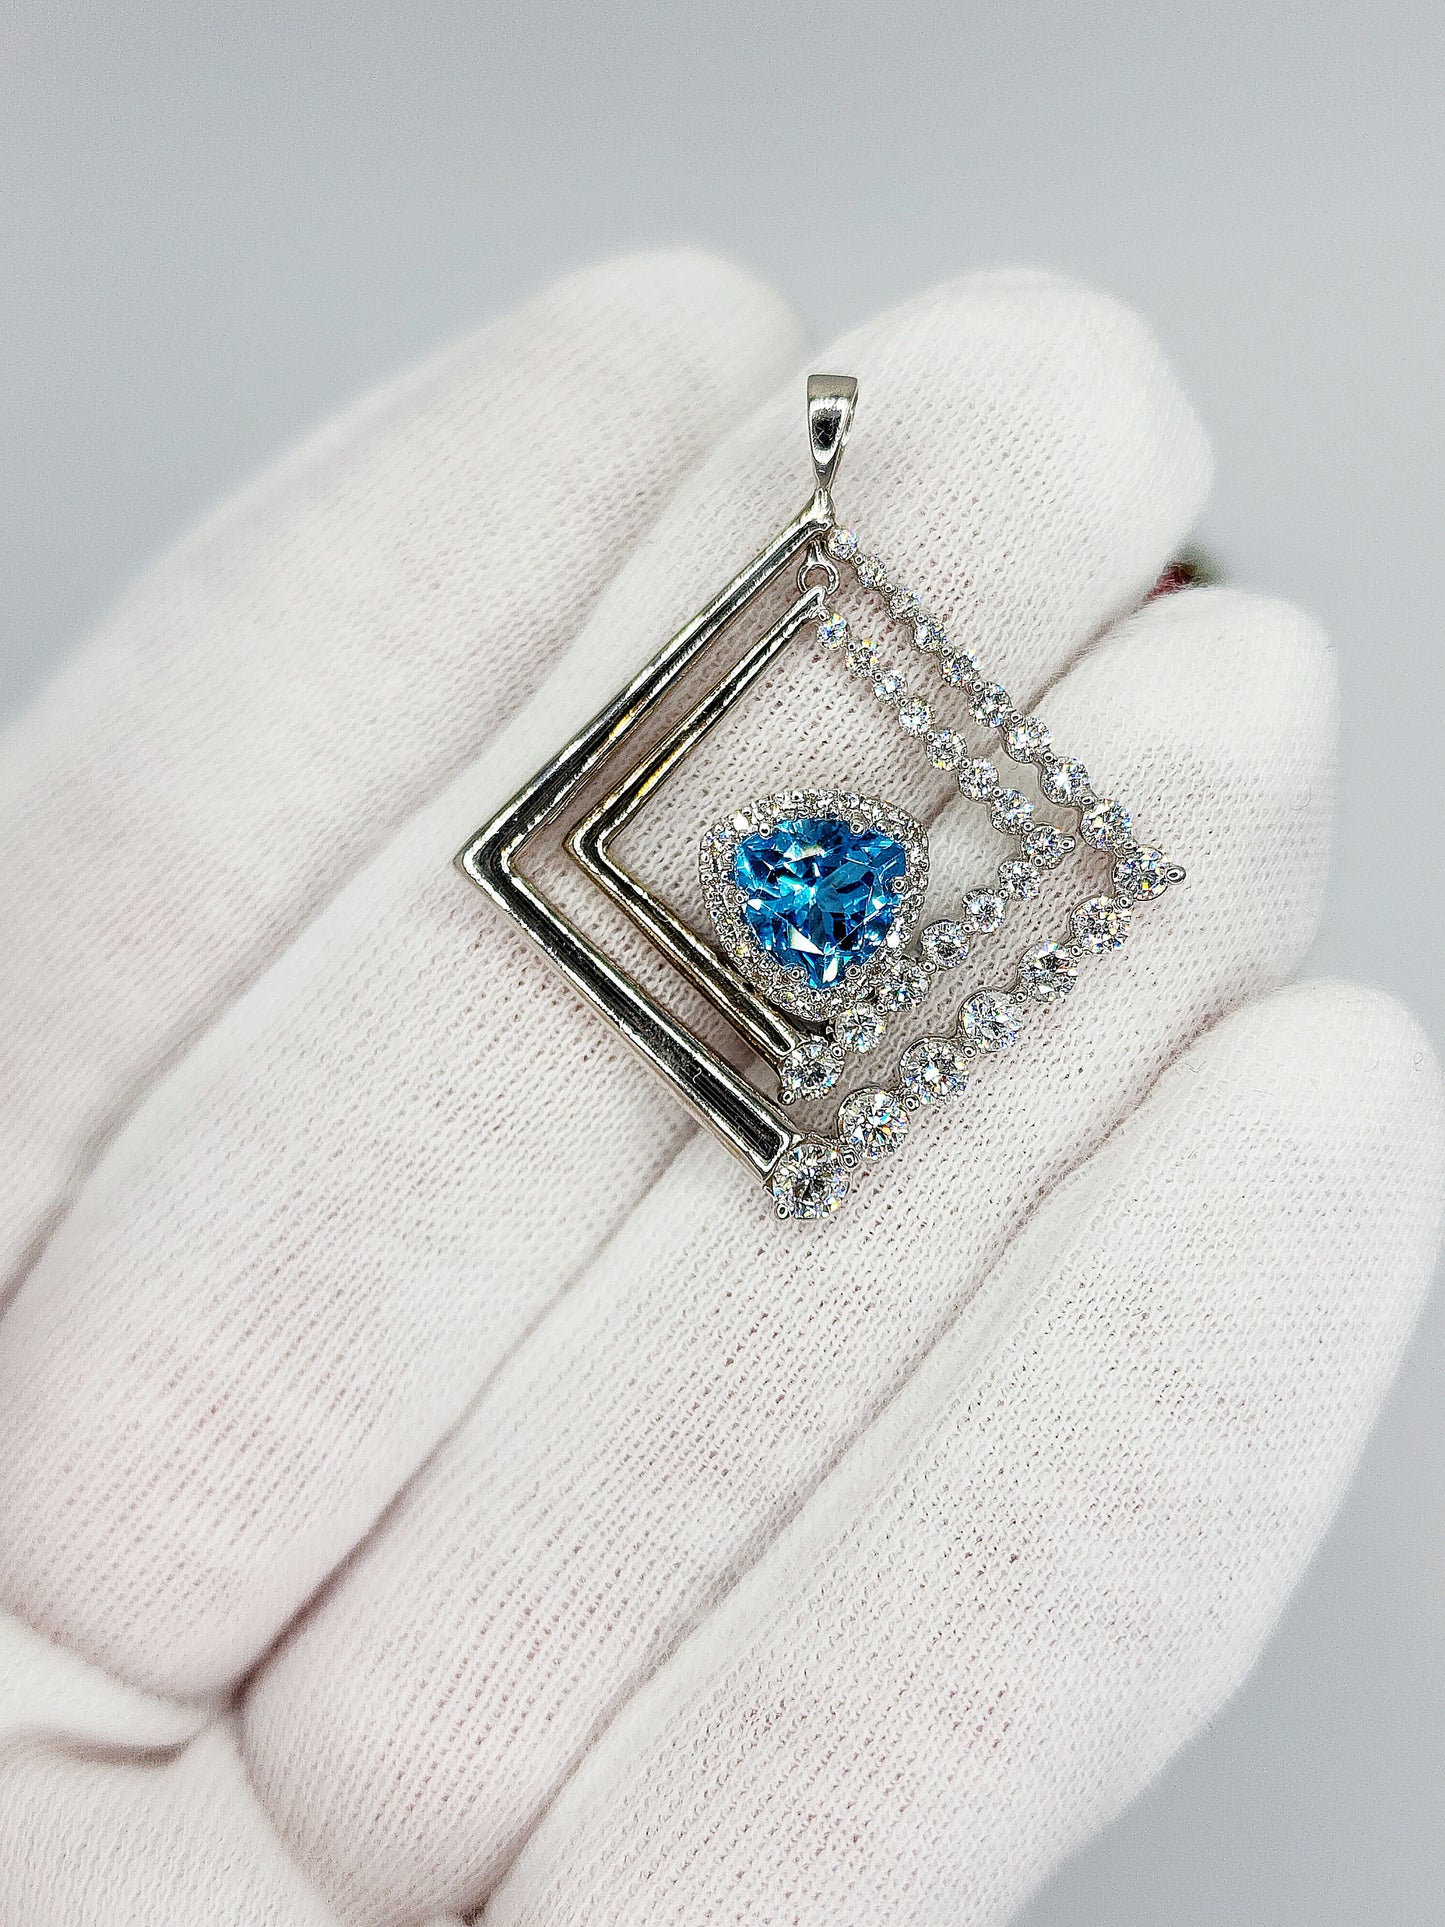 Diamond and Trillion Cut Blue Topaz Necklace in 14K White Gold